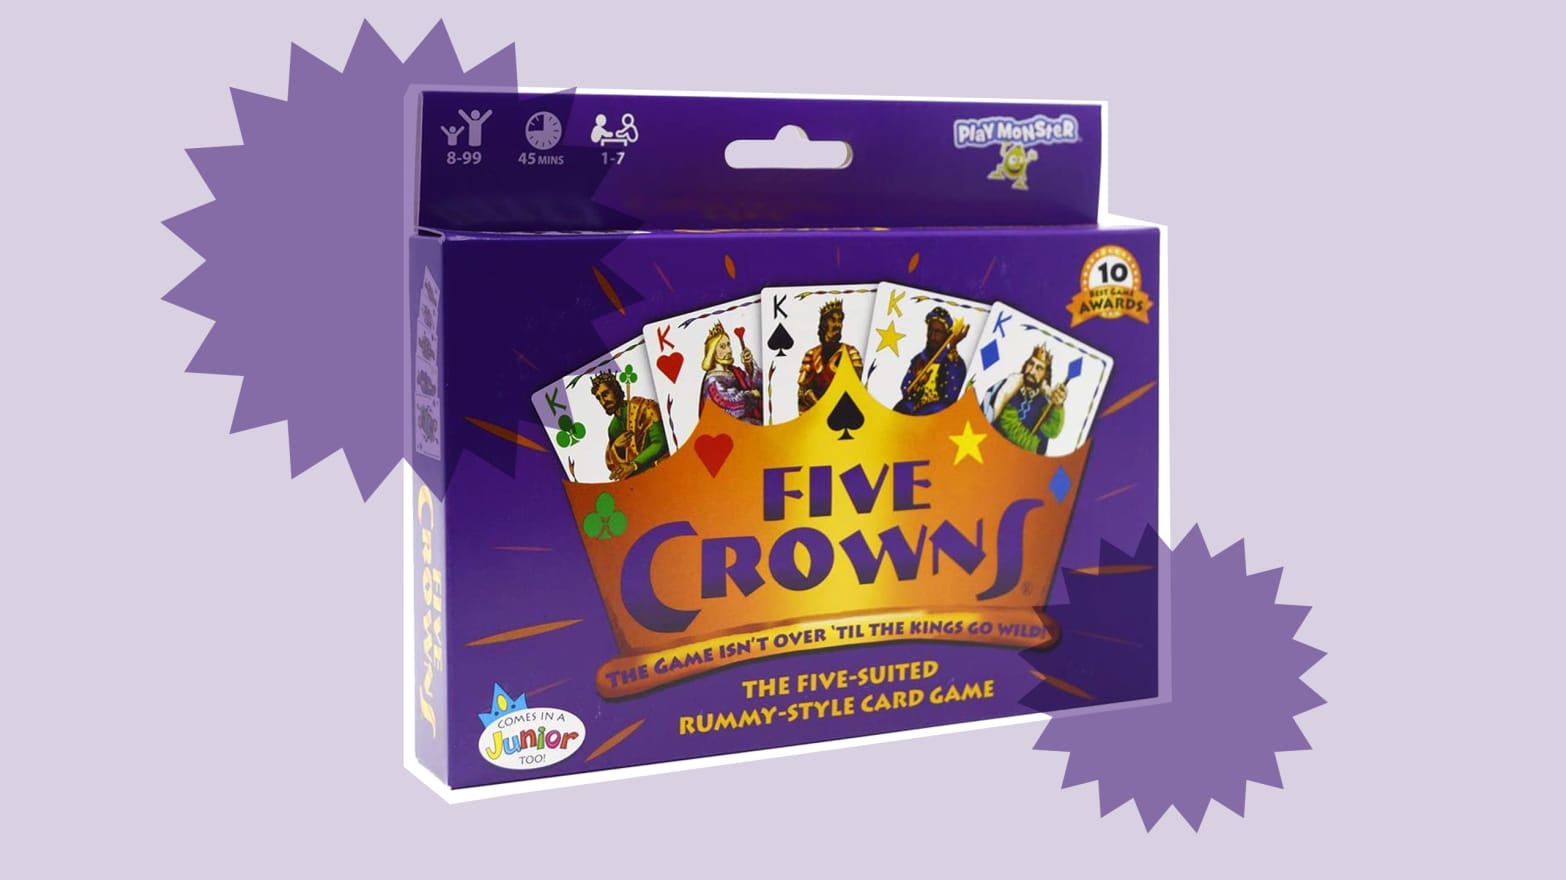 Best Card Game for Quarantine Is Five Crowns